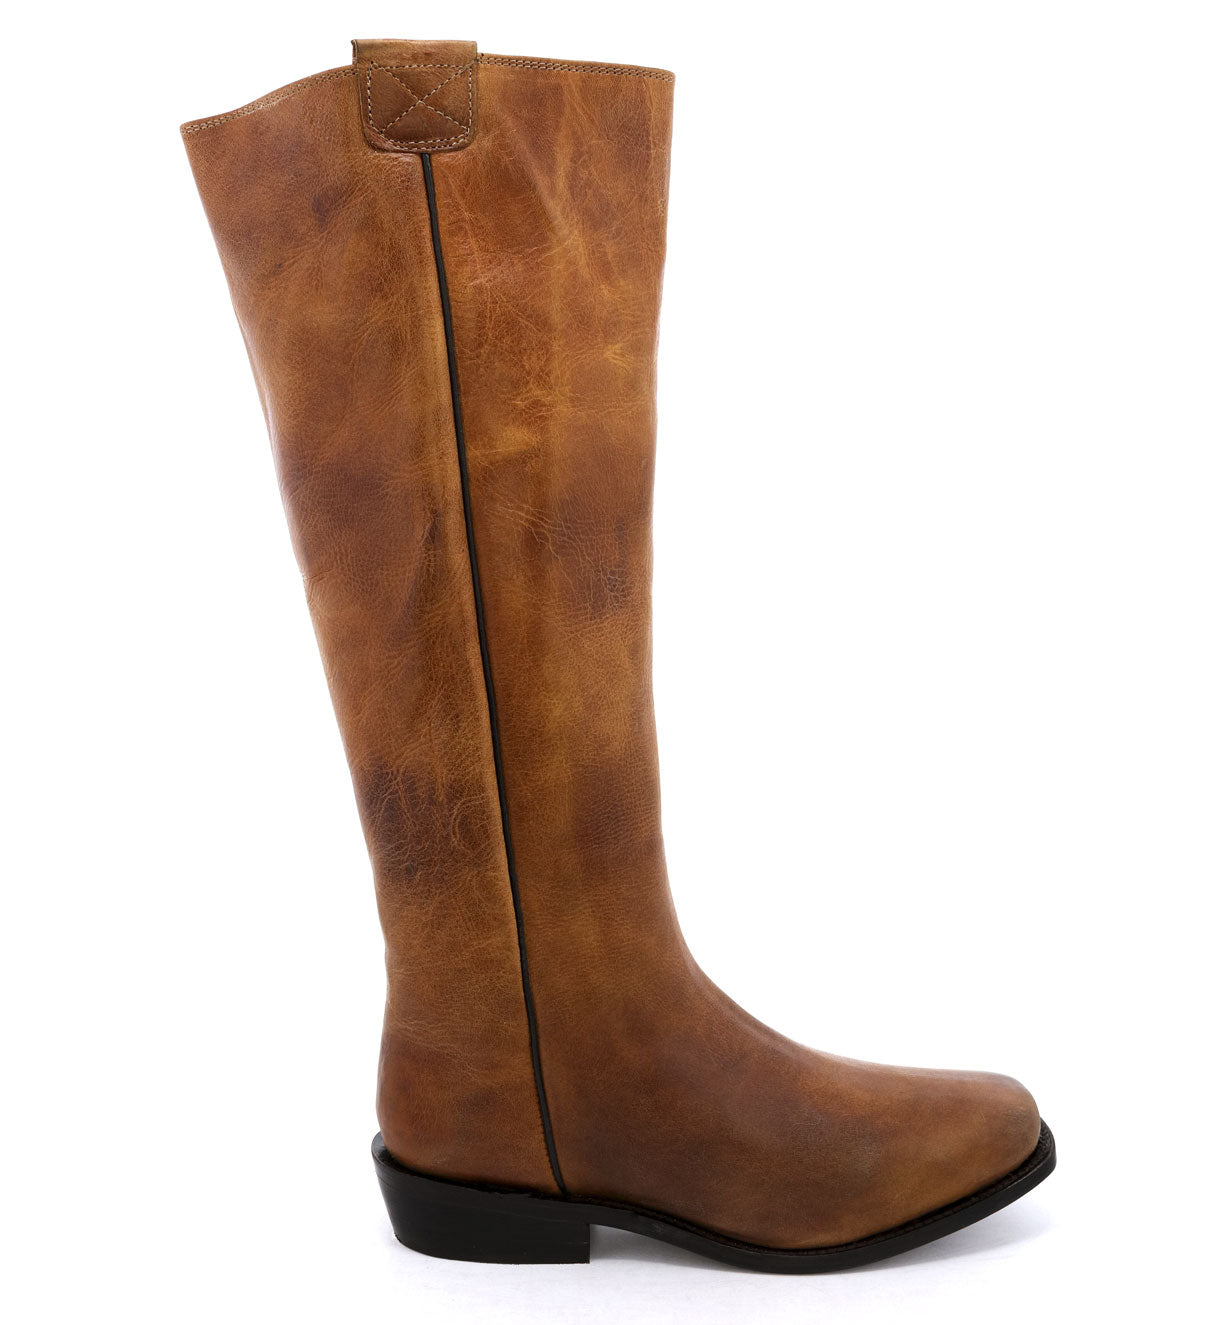 A women's leather boot, the Pale Rider from Oak Tree Farms, with a zipper on the side, perfect for adventures.